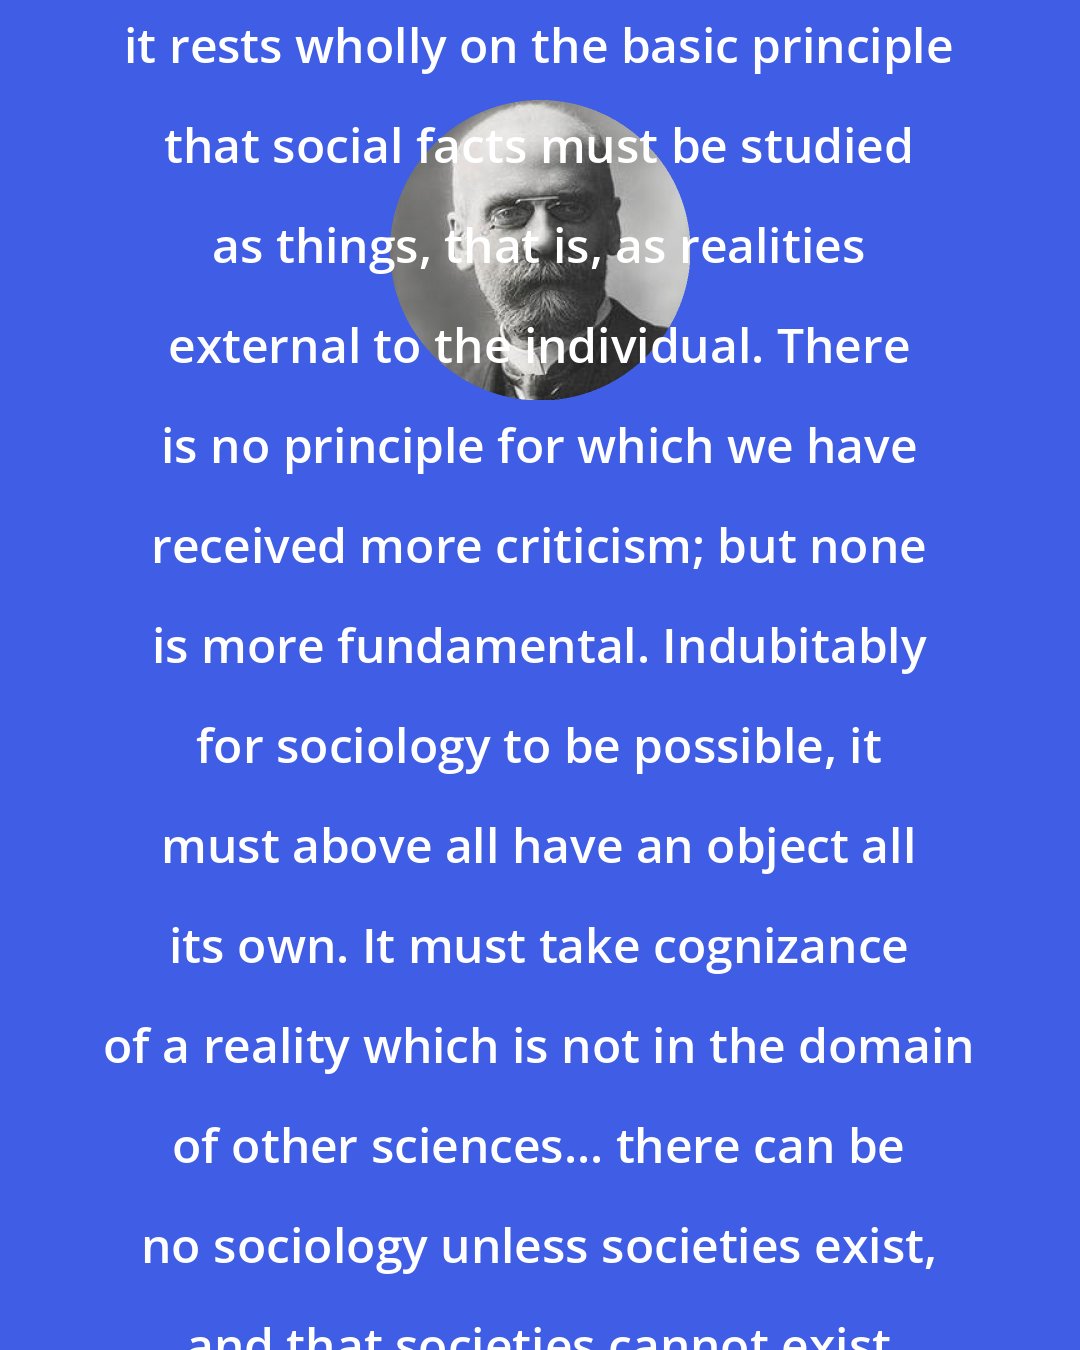 Emile Durkheim: Sociological method as we practice it rests wholly on the basic principle that social facts must be studied as things, that is, as realities external to the individual. There is no principle for which we have received more criticism; but none is more fundamental. Indubitably for sociology to be possible, it must above all have an object all its own. It must take cognizance of a reality which is not in the domain of other sciences... there can be no sociology unless societies exist, and that societies cannot exist if there are only individuals.